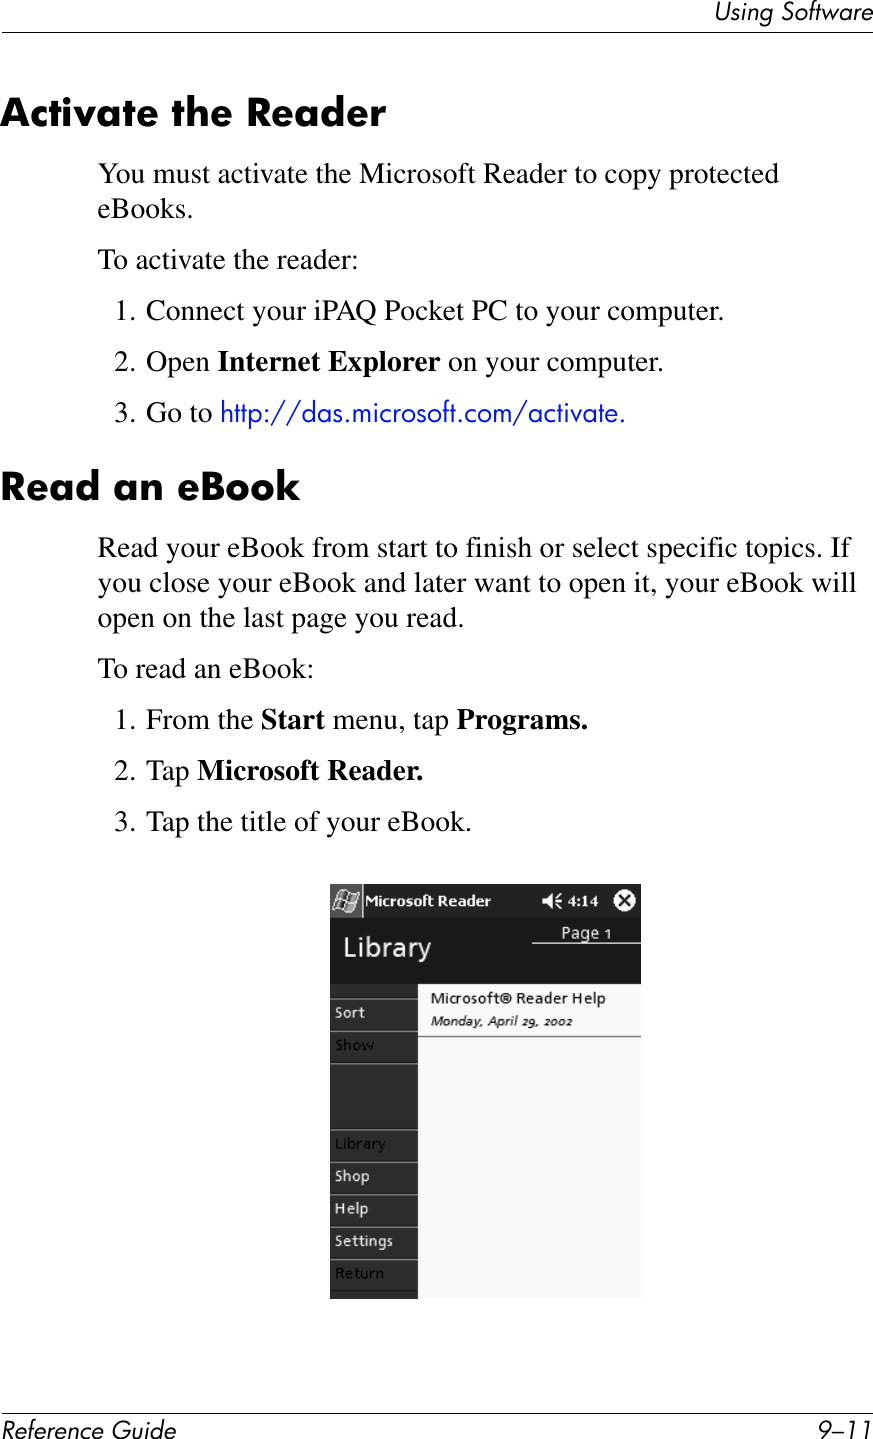 UL*%2&apos;37#1V4$&quot;!&quot;#&quot;$&quot;%&amp;&quot;&apos;()*+&quot; H/..,%7)N;7&quot;&amp;7?&quot;&amp;-&quot;;*&quot;!You must activate the Microsoft Reader to copy protected eBooks.To activate the reader:1. Connect your iPAQ Pocket PC to your computer.2. Open Internet Explorer on your computer.3. Go to !,,&quot;:^^C71G5$)2(1(B,G)(5^7),$P7,+G-&quot;;*&amp;;$&amp;&quot;C66TRead your eBook from start to finish or select specific topics. If you close your eBook and later want to open it, your eBook will open on the last page you read.To read an eBook:1. From the Start menu, tap Programs.2. Tap Microsoft Reader.3. Tap the title of your eBook.